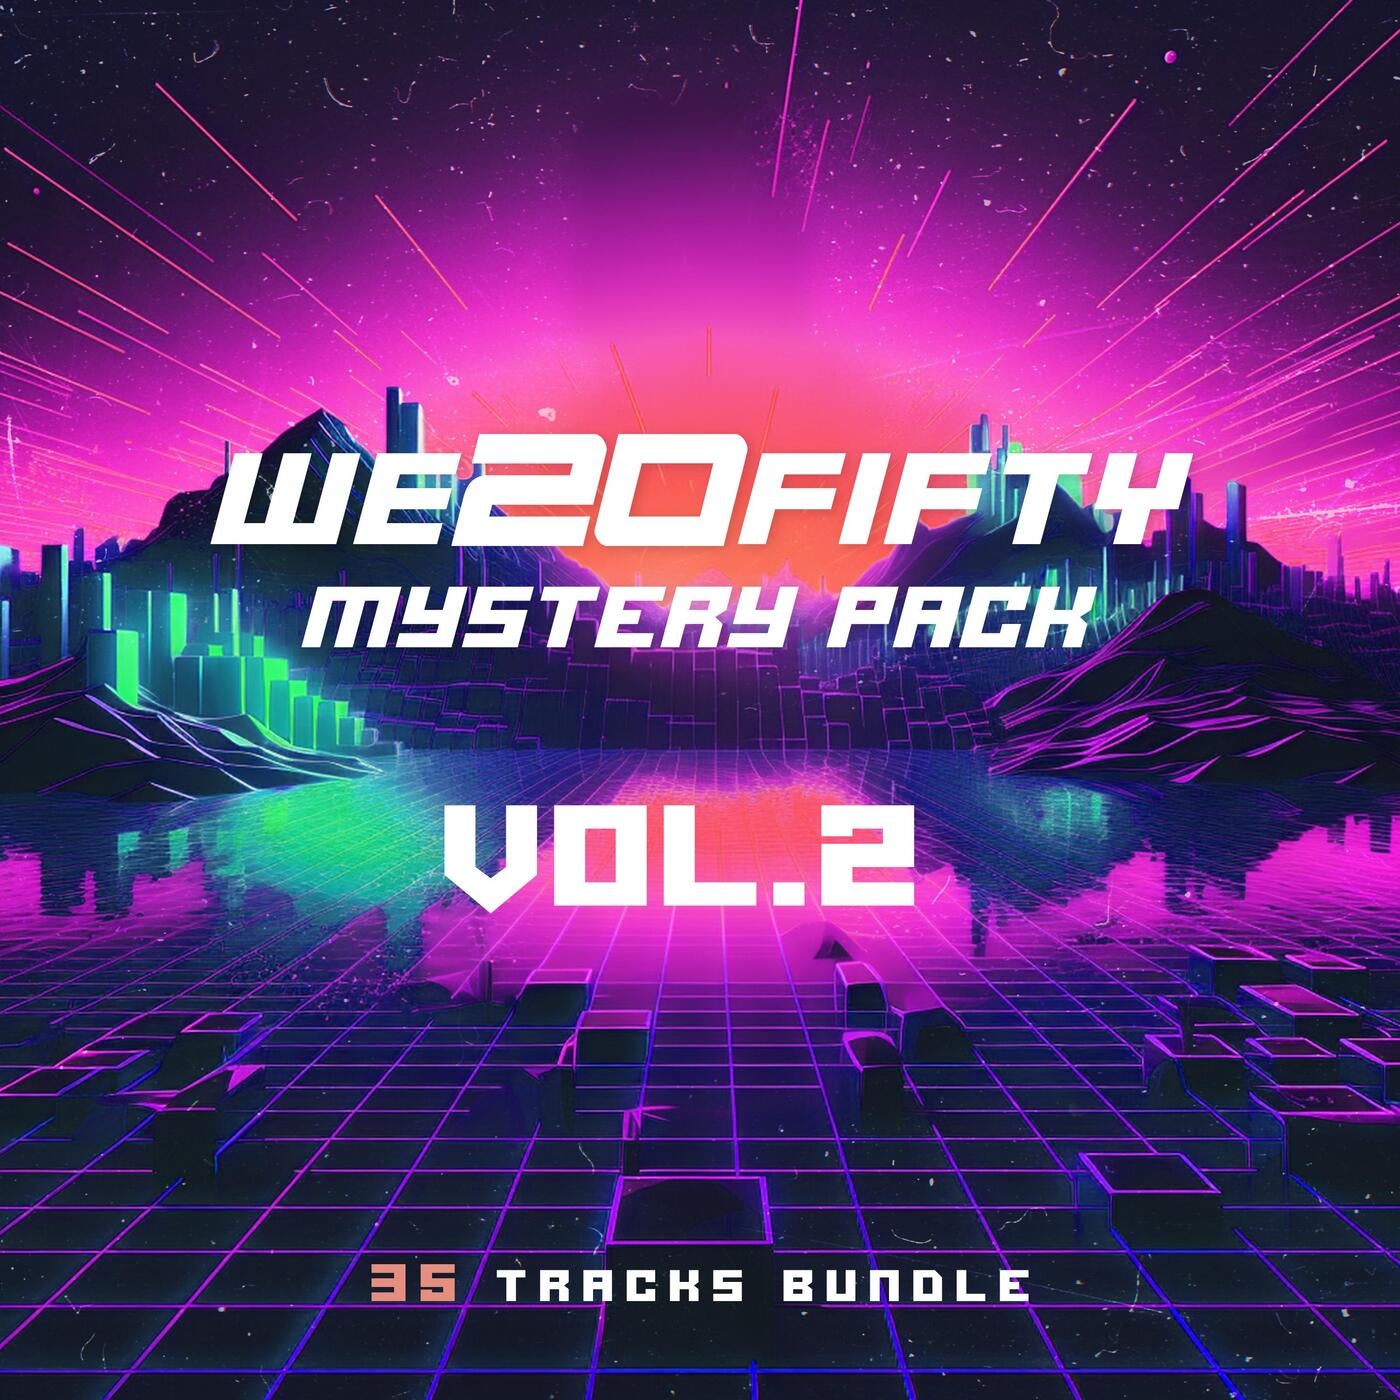 MYSTERY PACK, Vol. 2